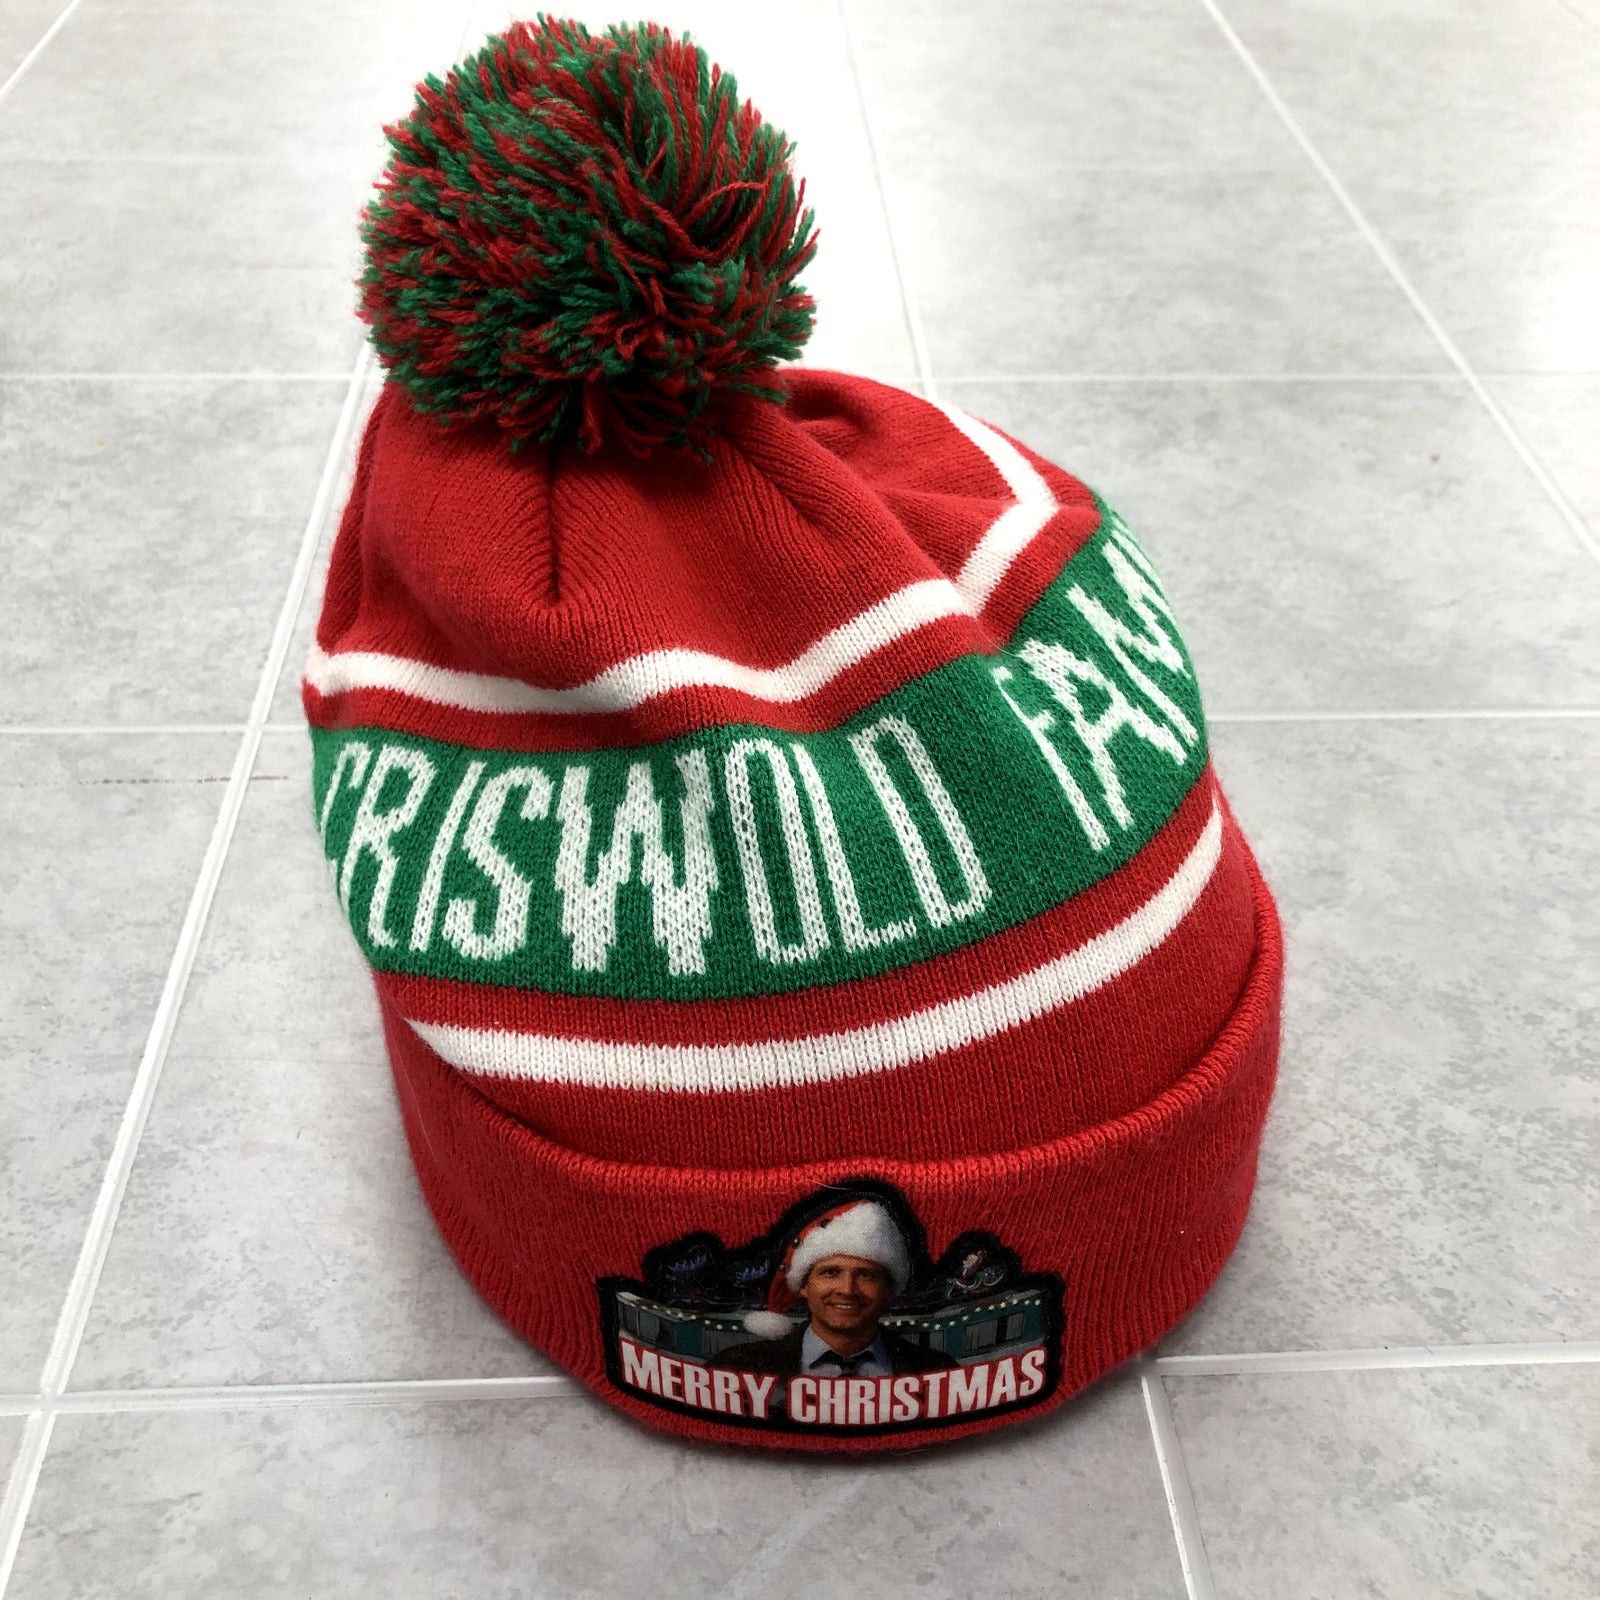 National Lampoon Red Knit Graphic Griswold Christmas Beanie Adult One Size